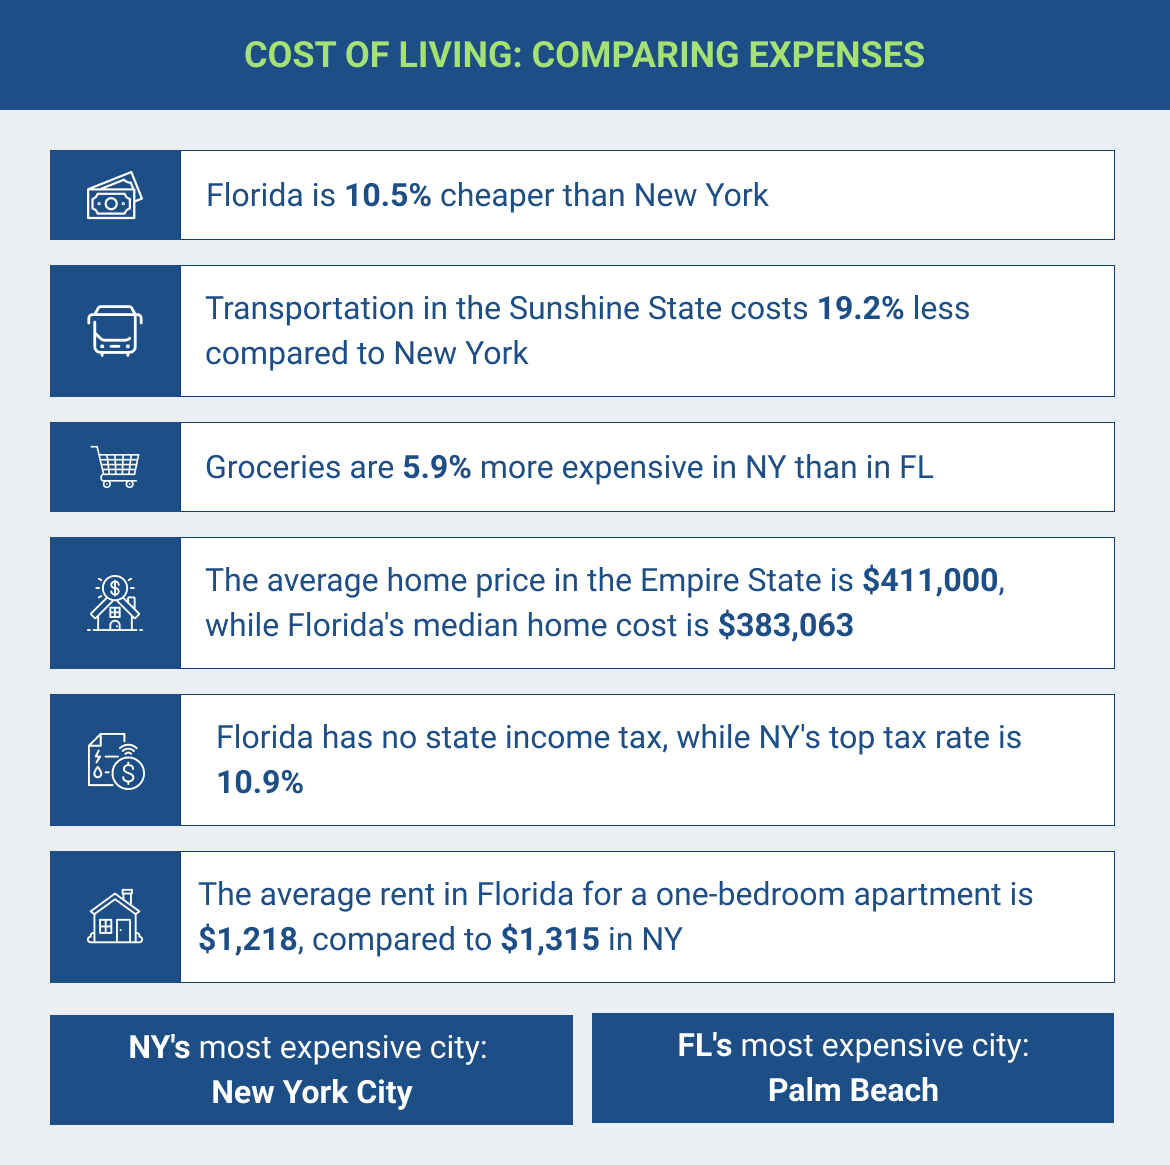 Florida is 10.5% cheaper than New York Transportation in the Sunshine State costs 19.2% less compared to New York Groceries are 5.9% more expensive in NY than in FL The average home price in the Empire State is $411,000, while Florida's median home cost is $383,063 Florida has no state income tax, while NY's top tax rate is 10.9% The average rent in Florida for a one-bedroom apartment is $1,218, compared to $1,315 in NY FL's most expensive city - Palm Beach NY's most expensive city - New York City